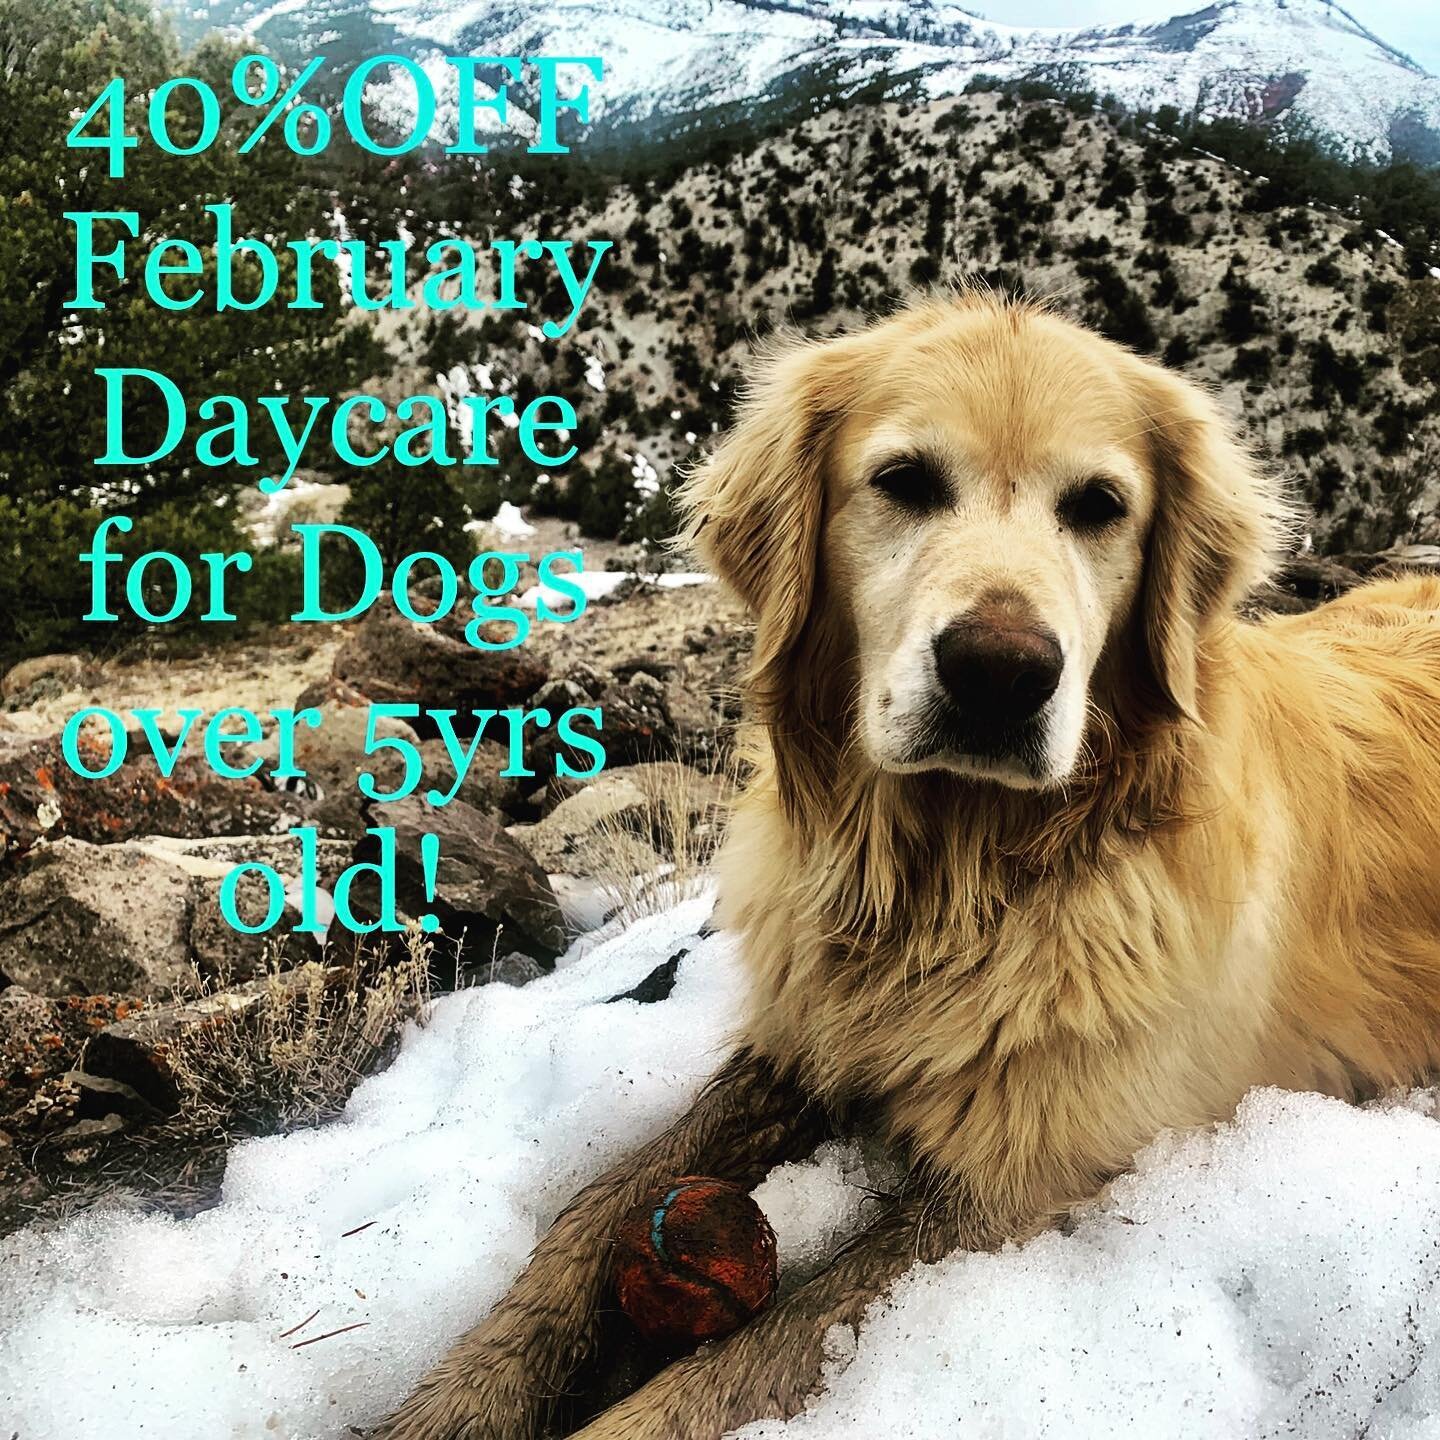 In honor of Boone&rsquo;s Birthday month, Peace Love Petcare will offer 40% off Full or Half Day Daycare for Dogs Over 5 years old for all of February!  Thanks Boone for sharing so many adventures, including Peace Love Petcare! #peacelovepetcare #boo